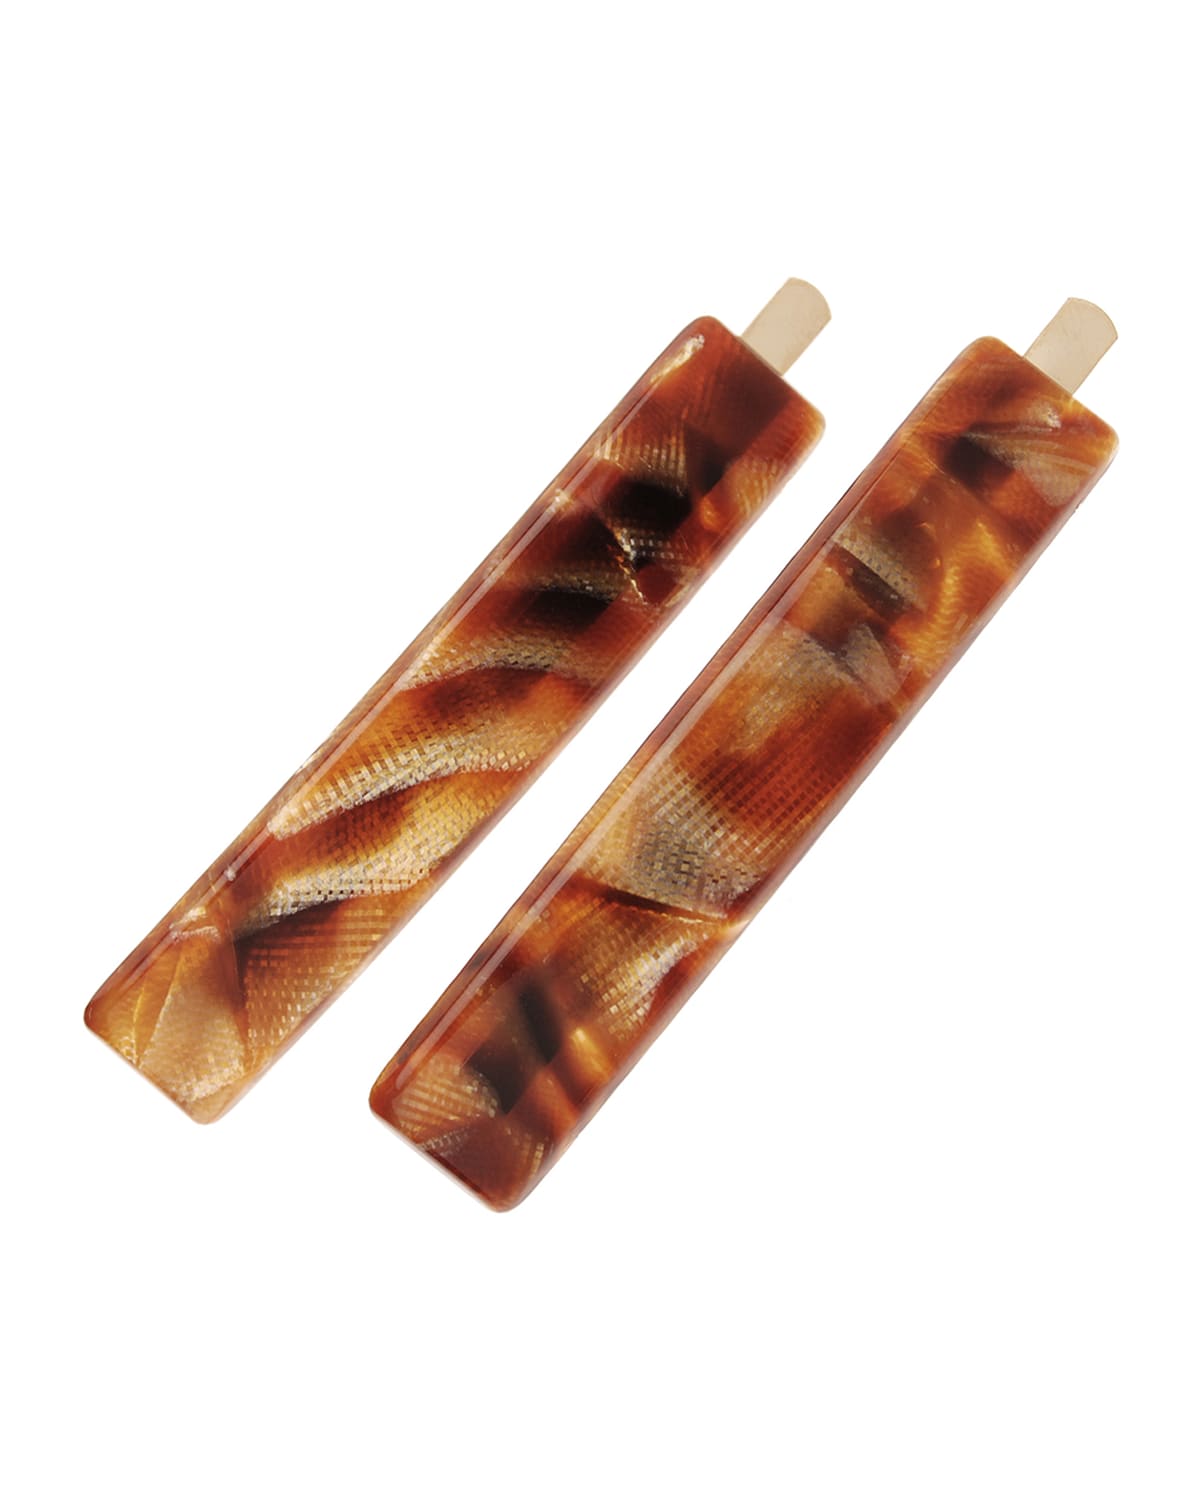 France Luxe Mod Bobby Pins, Set Of 2 In Africa